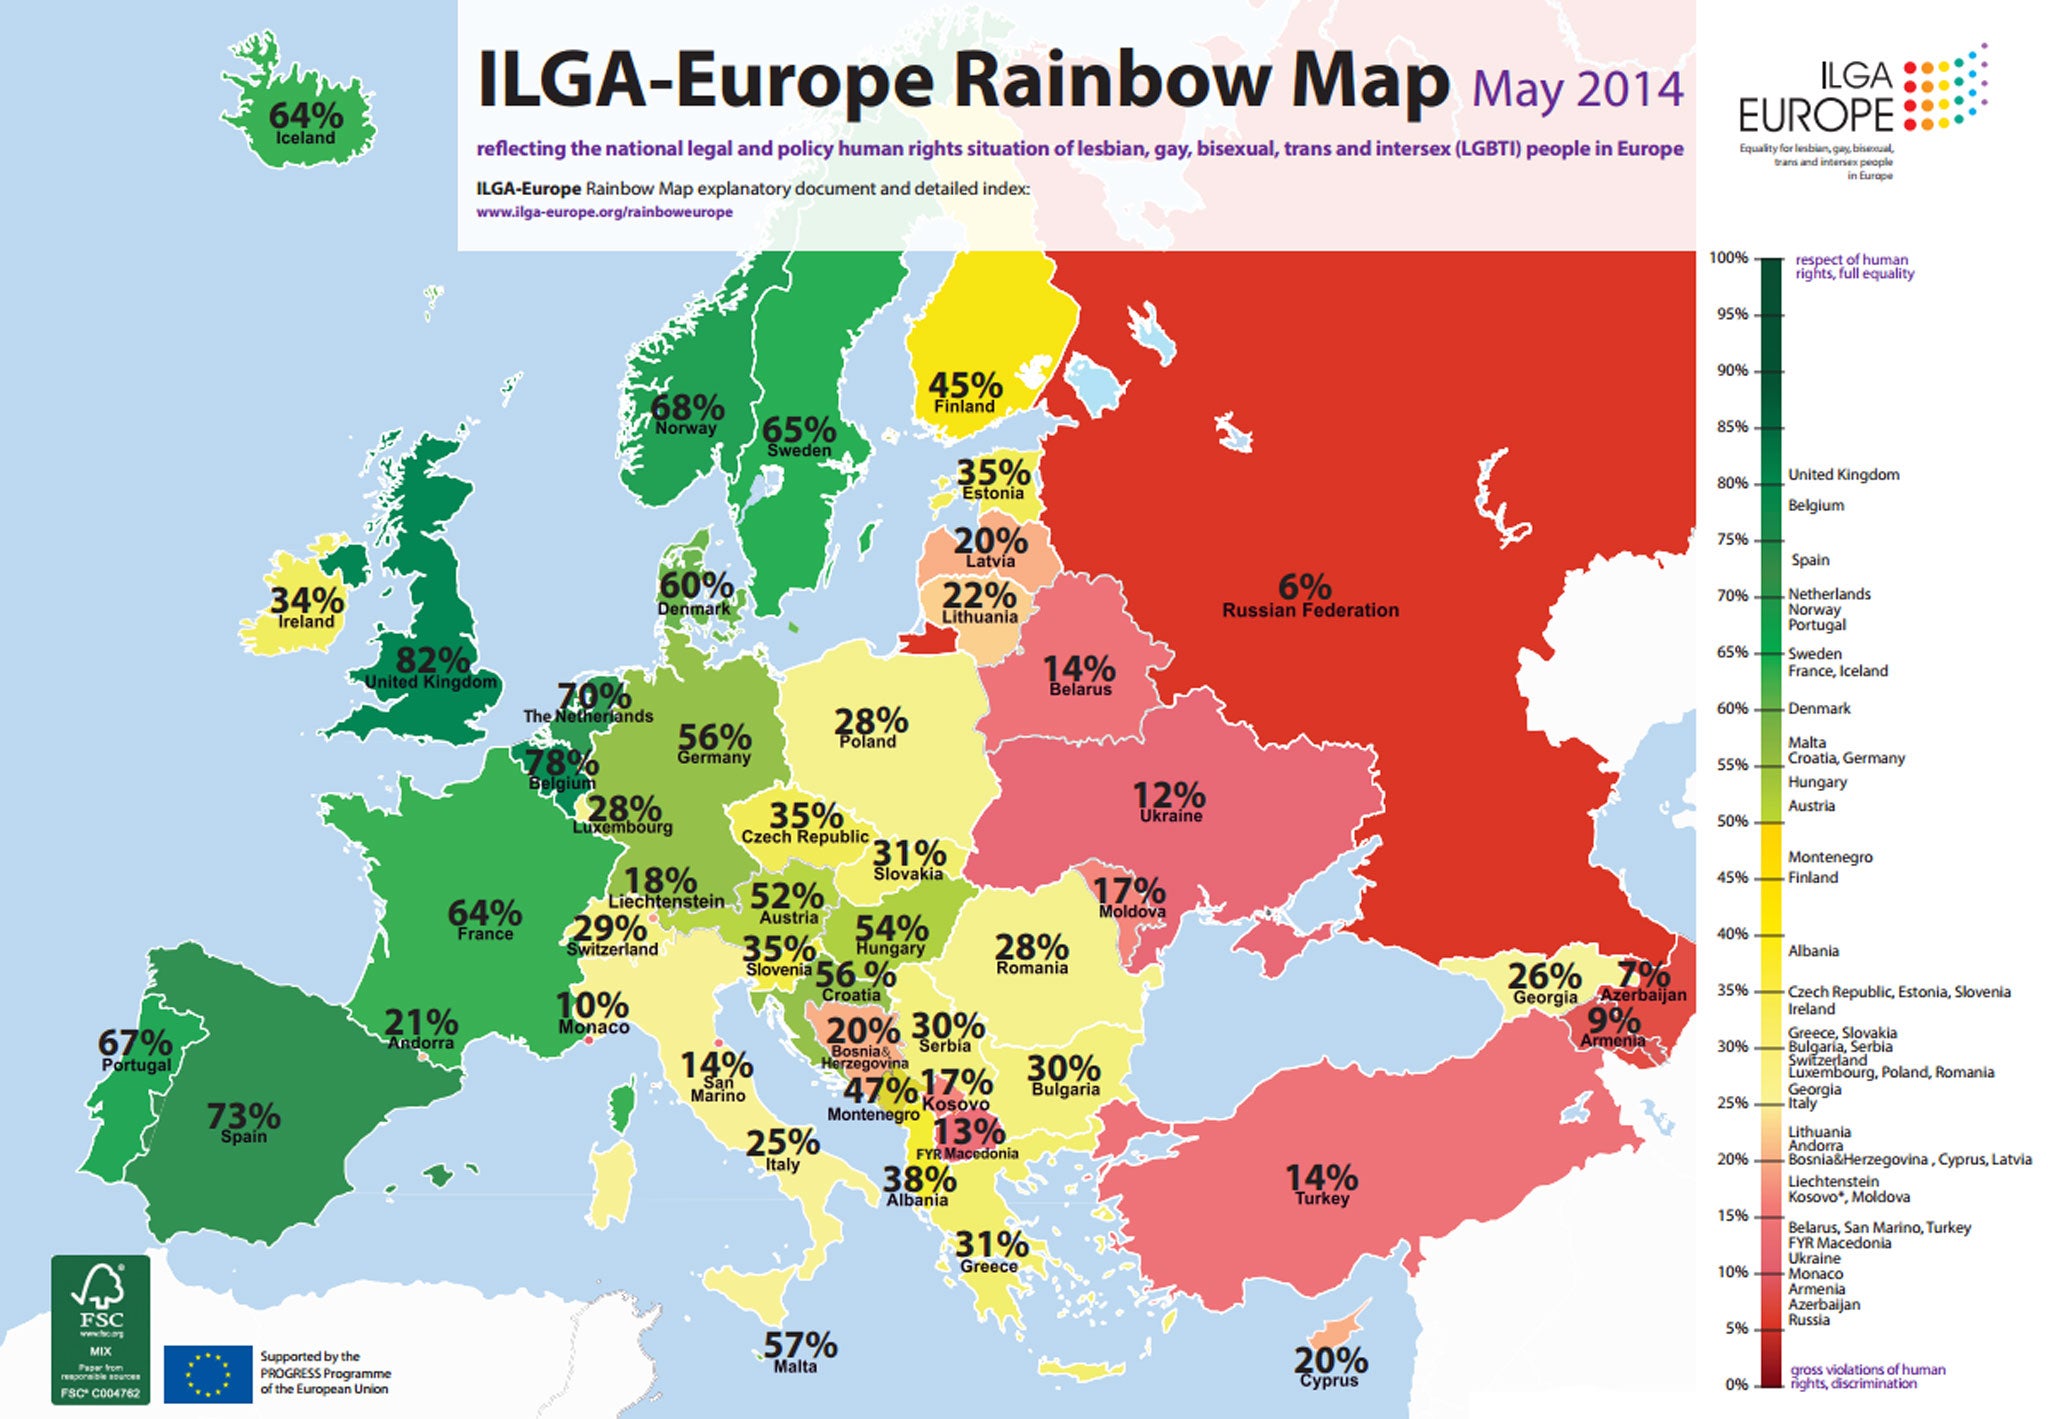 Last week a Rainbow Europe survey identified Italy as one of the worst 10 countries in the continent for LGBT rights, scoring just 25% compared to the UK's 82%